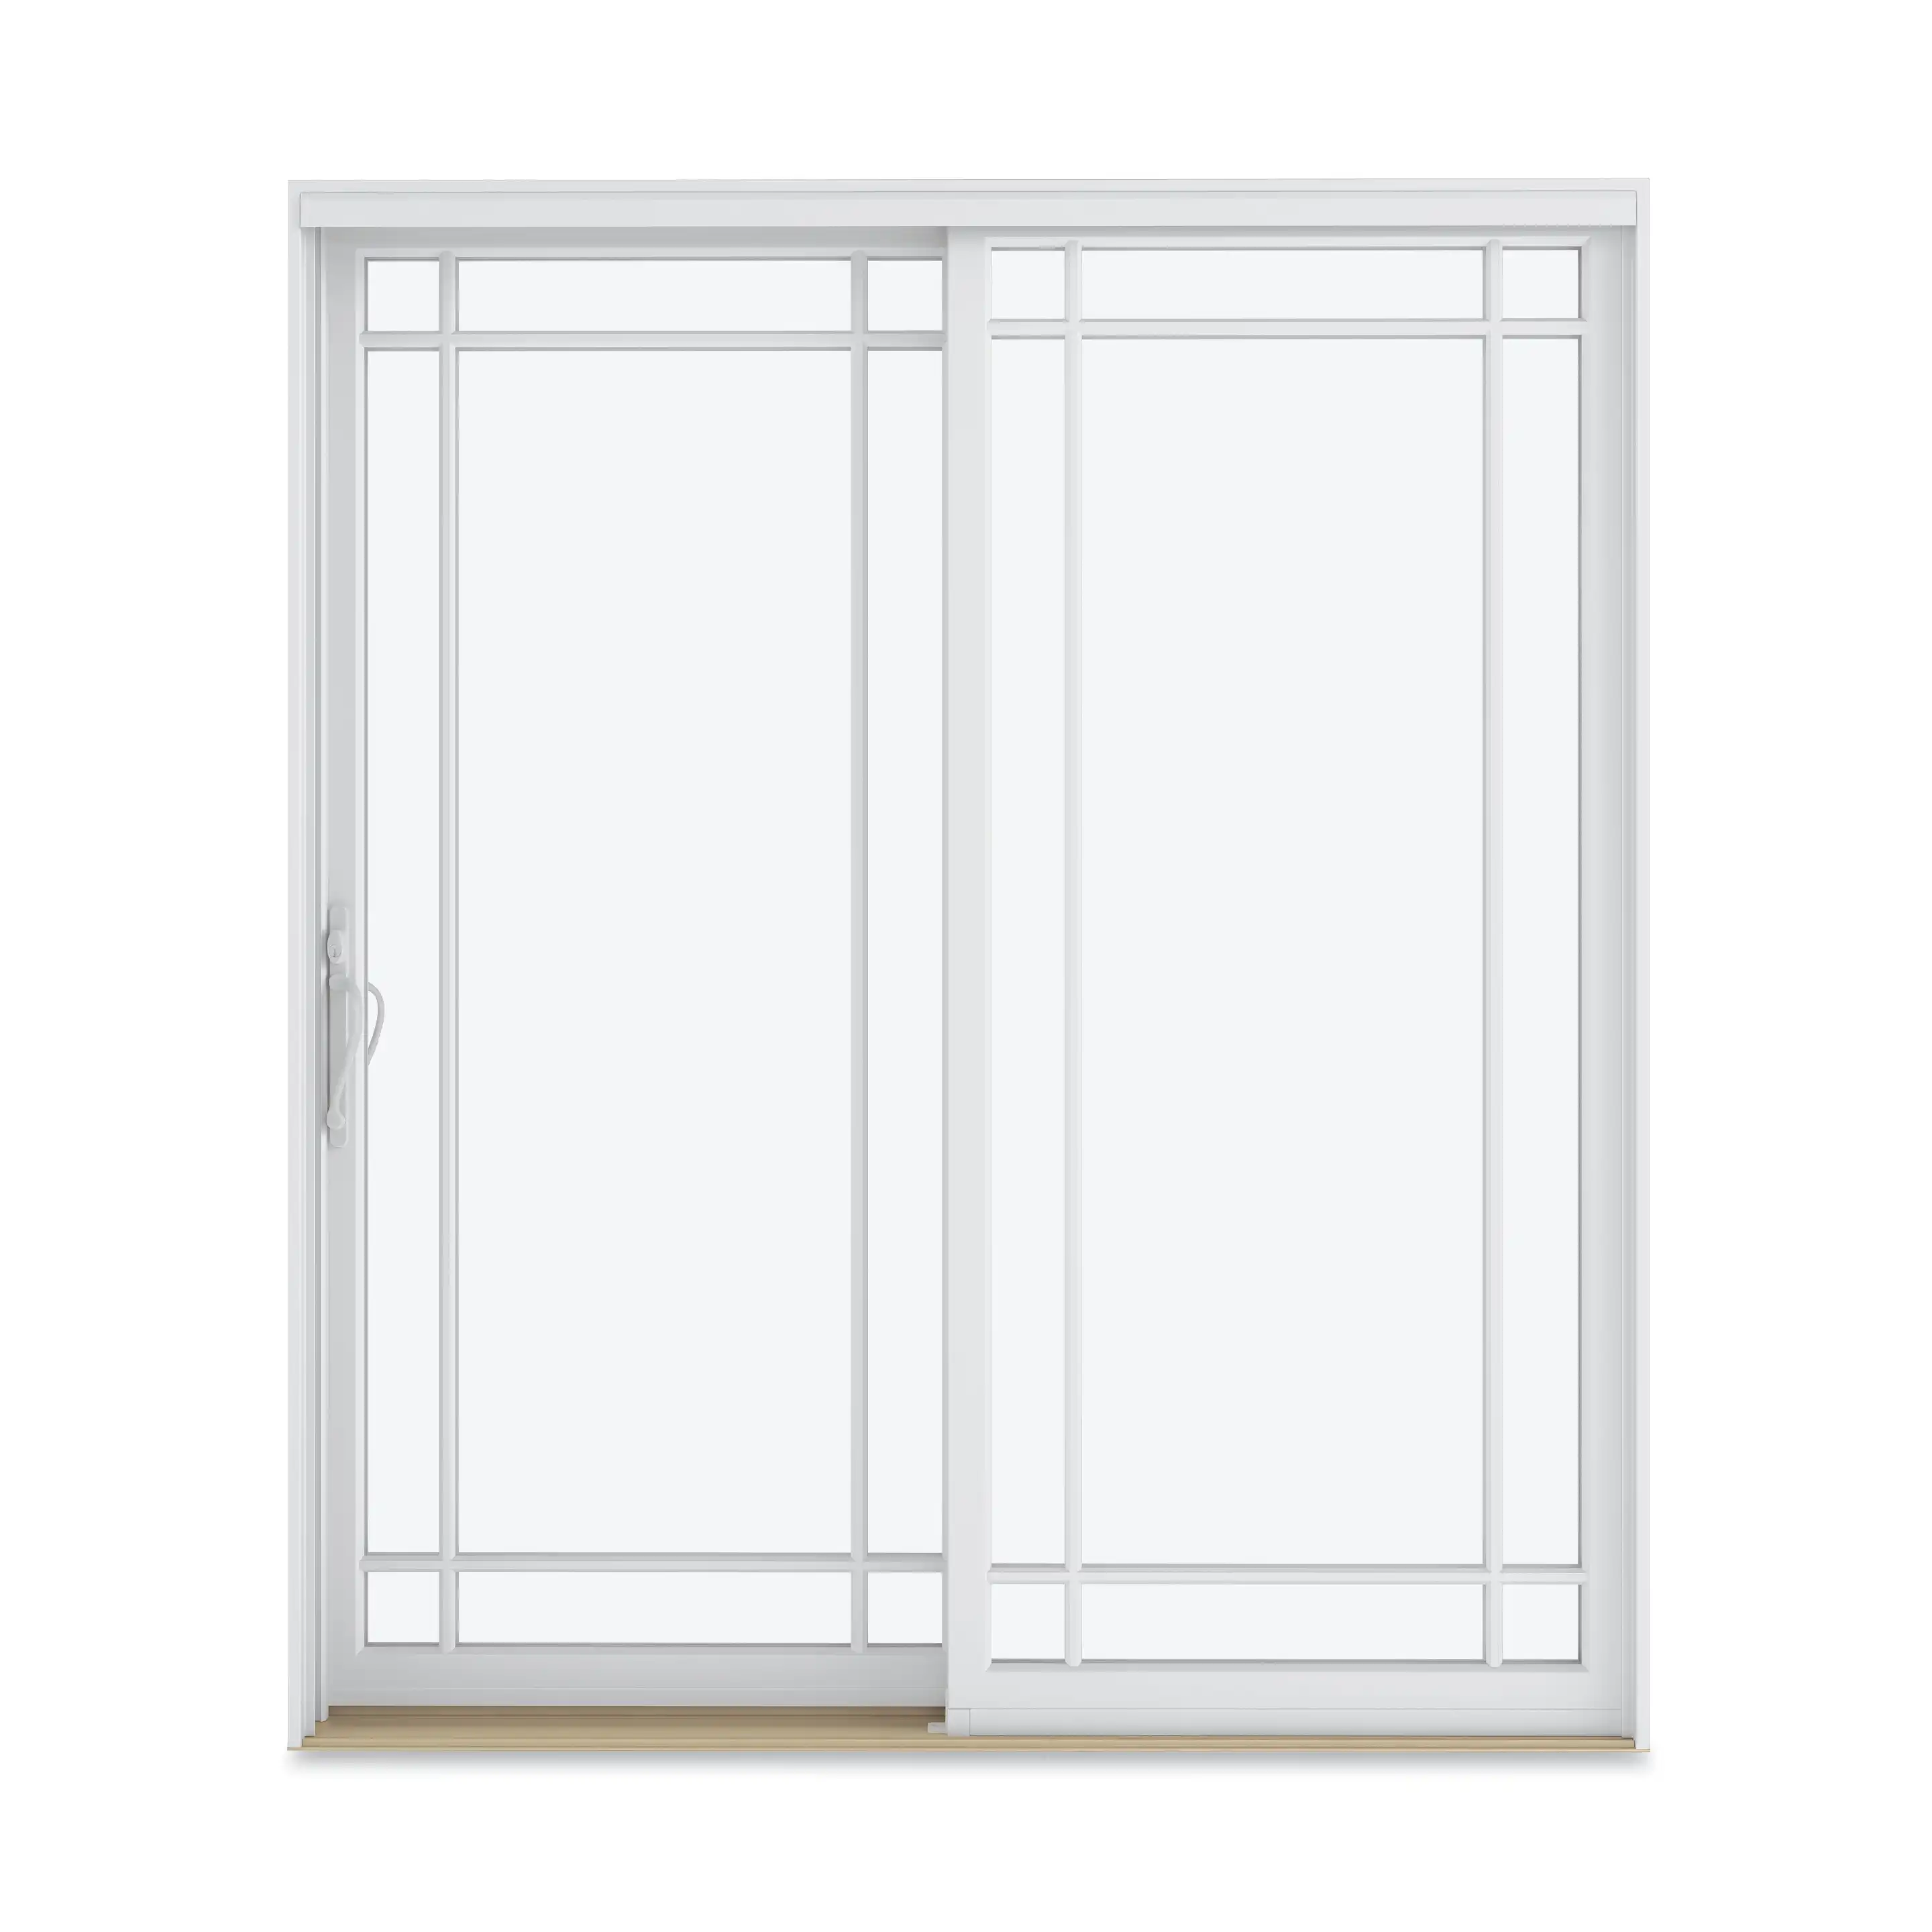 Marvin Replacement white two-panel Sliding Glass Patio Door with Prairie Style divided lites.